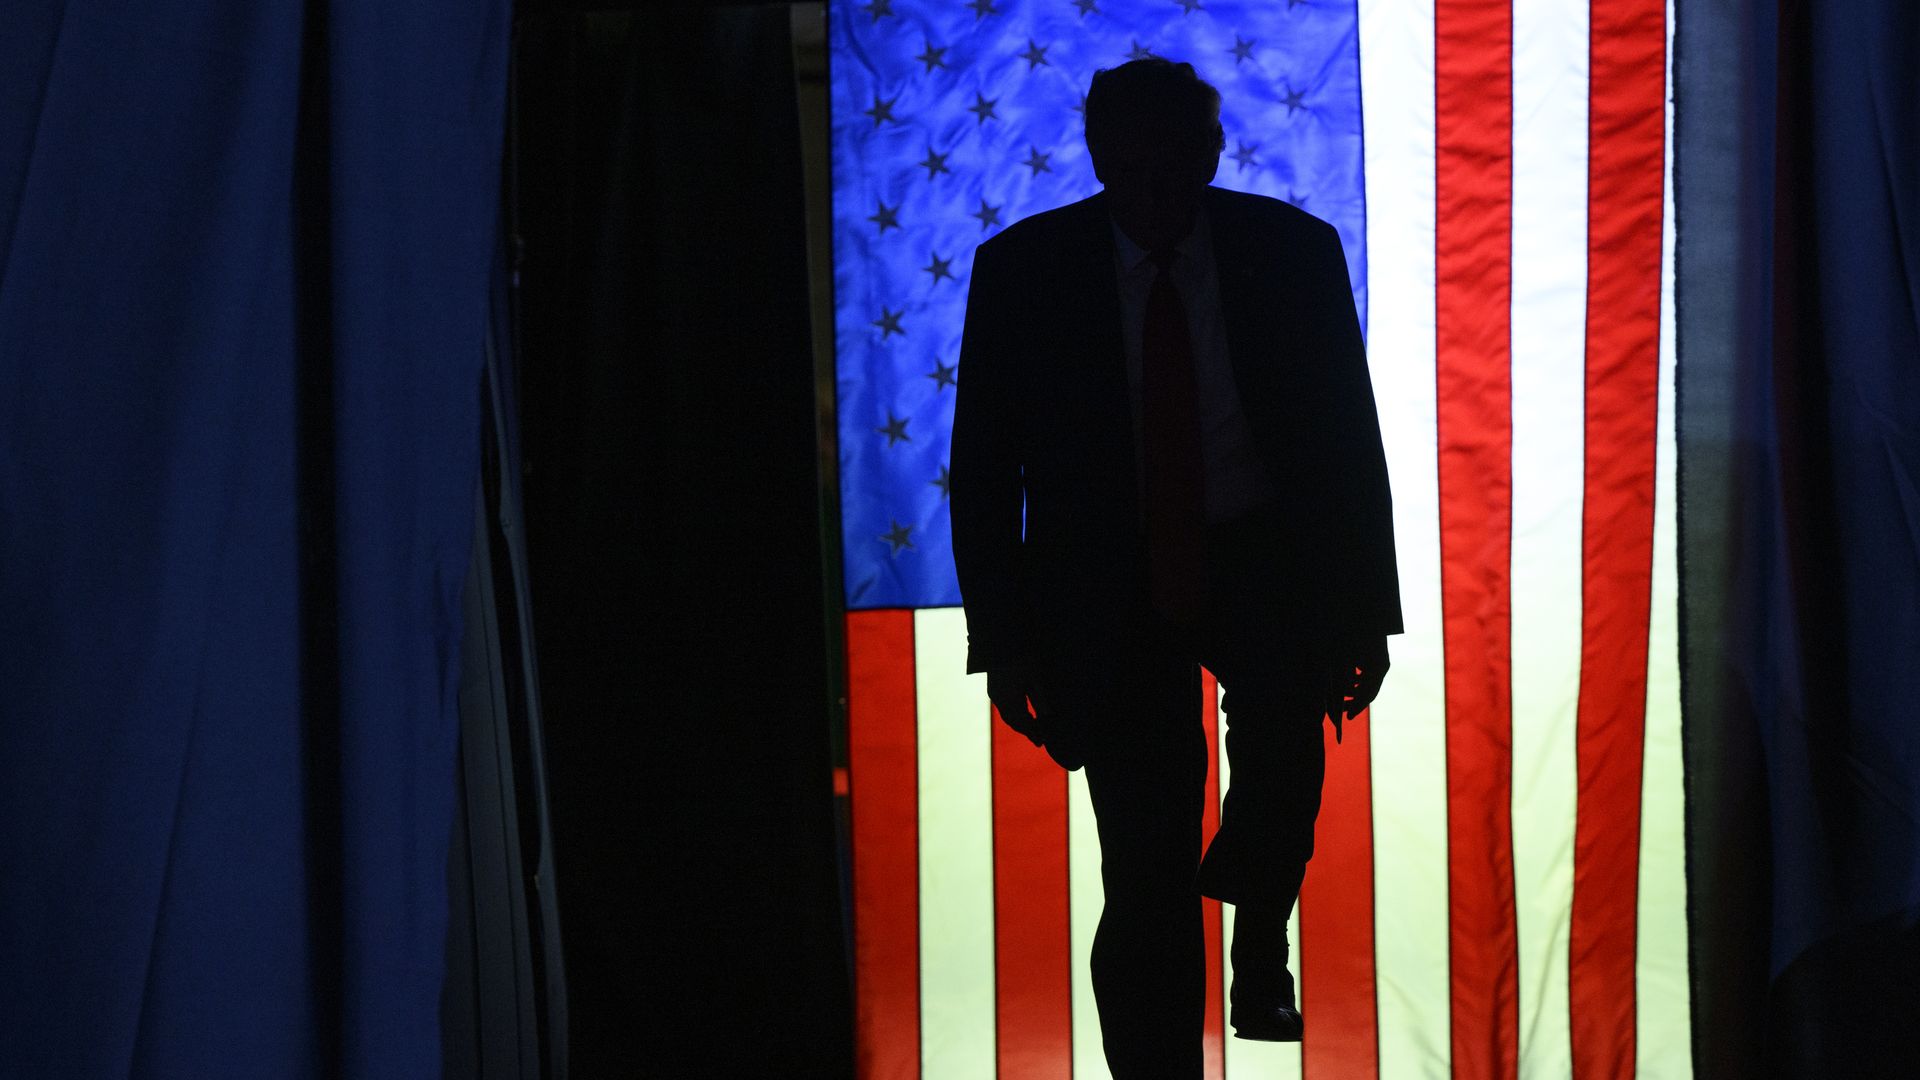 A silhouette of former President Trump in front of an American flag.